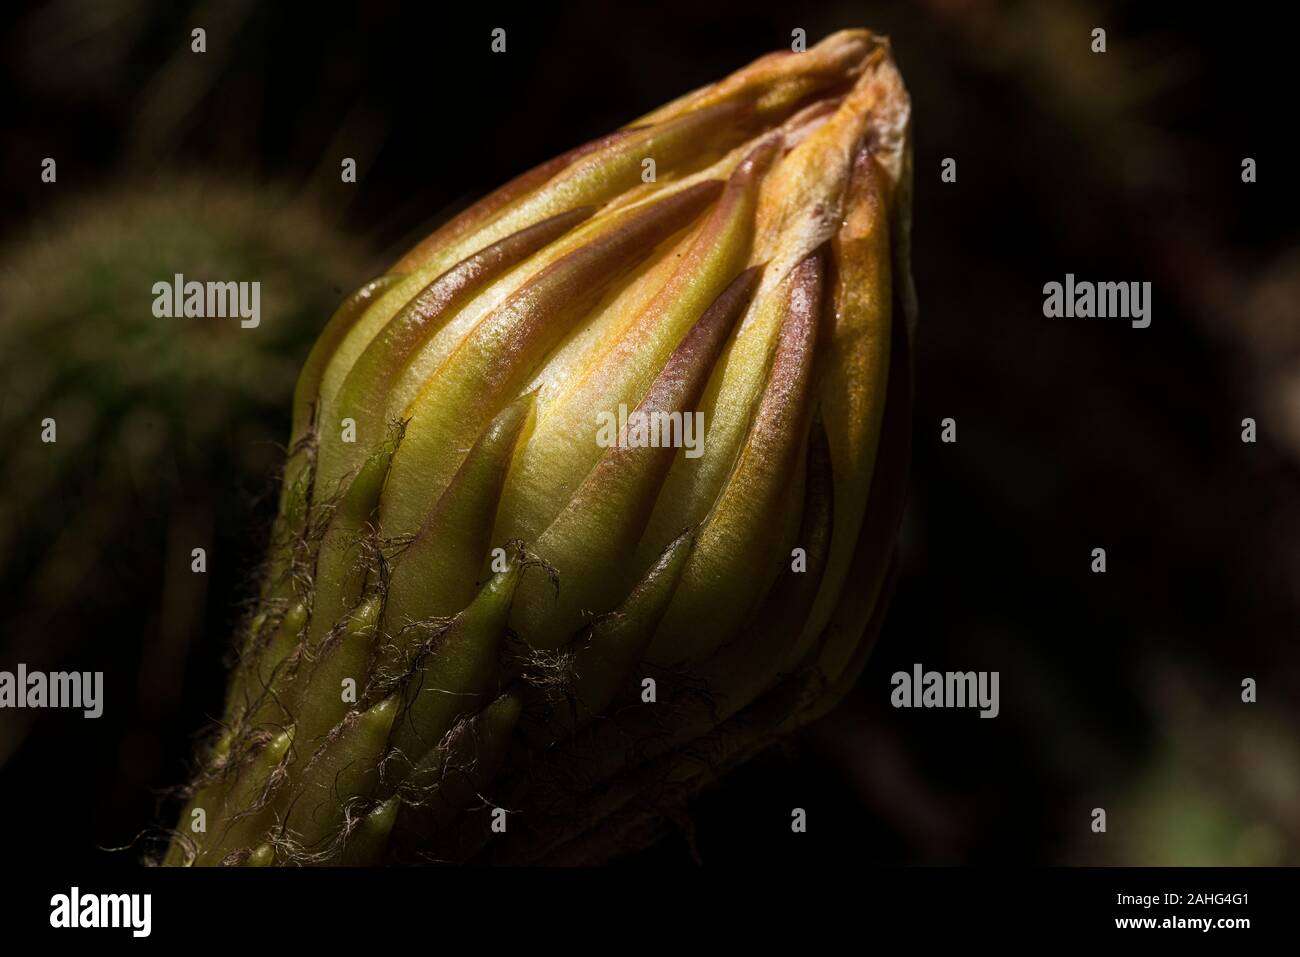 Closeup image of an unopened Torch cactus bud Stock Photo